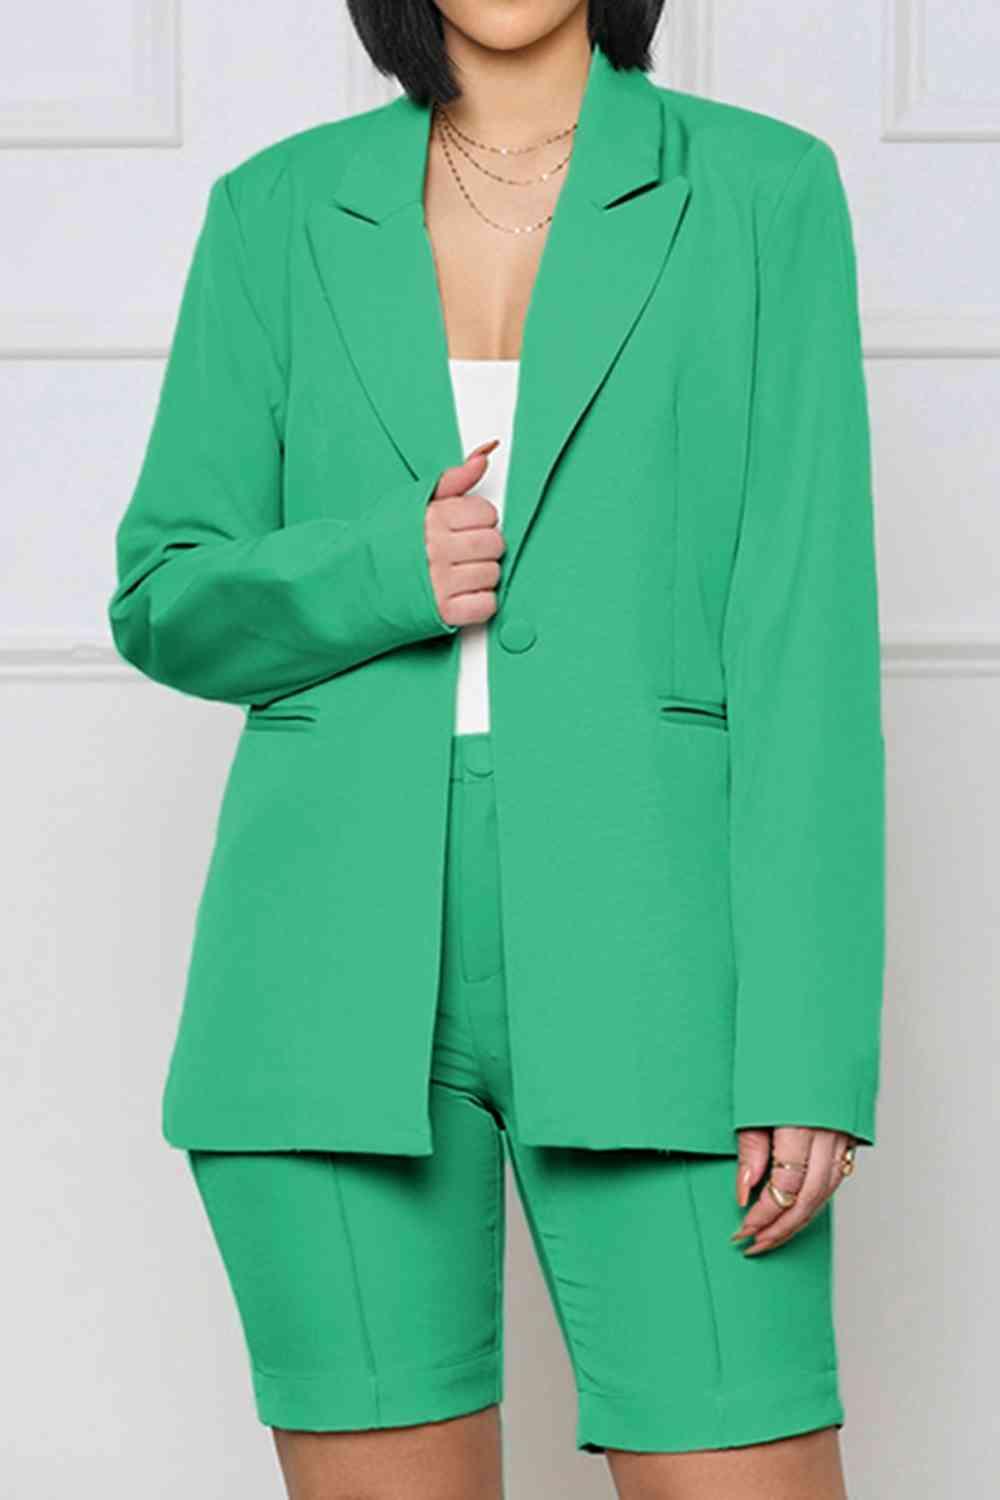 a woman wearing a green suit and shorts